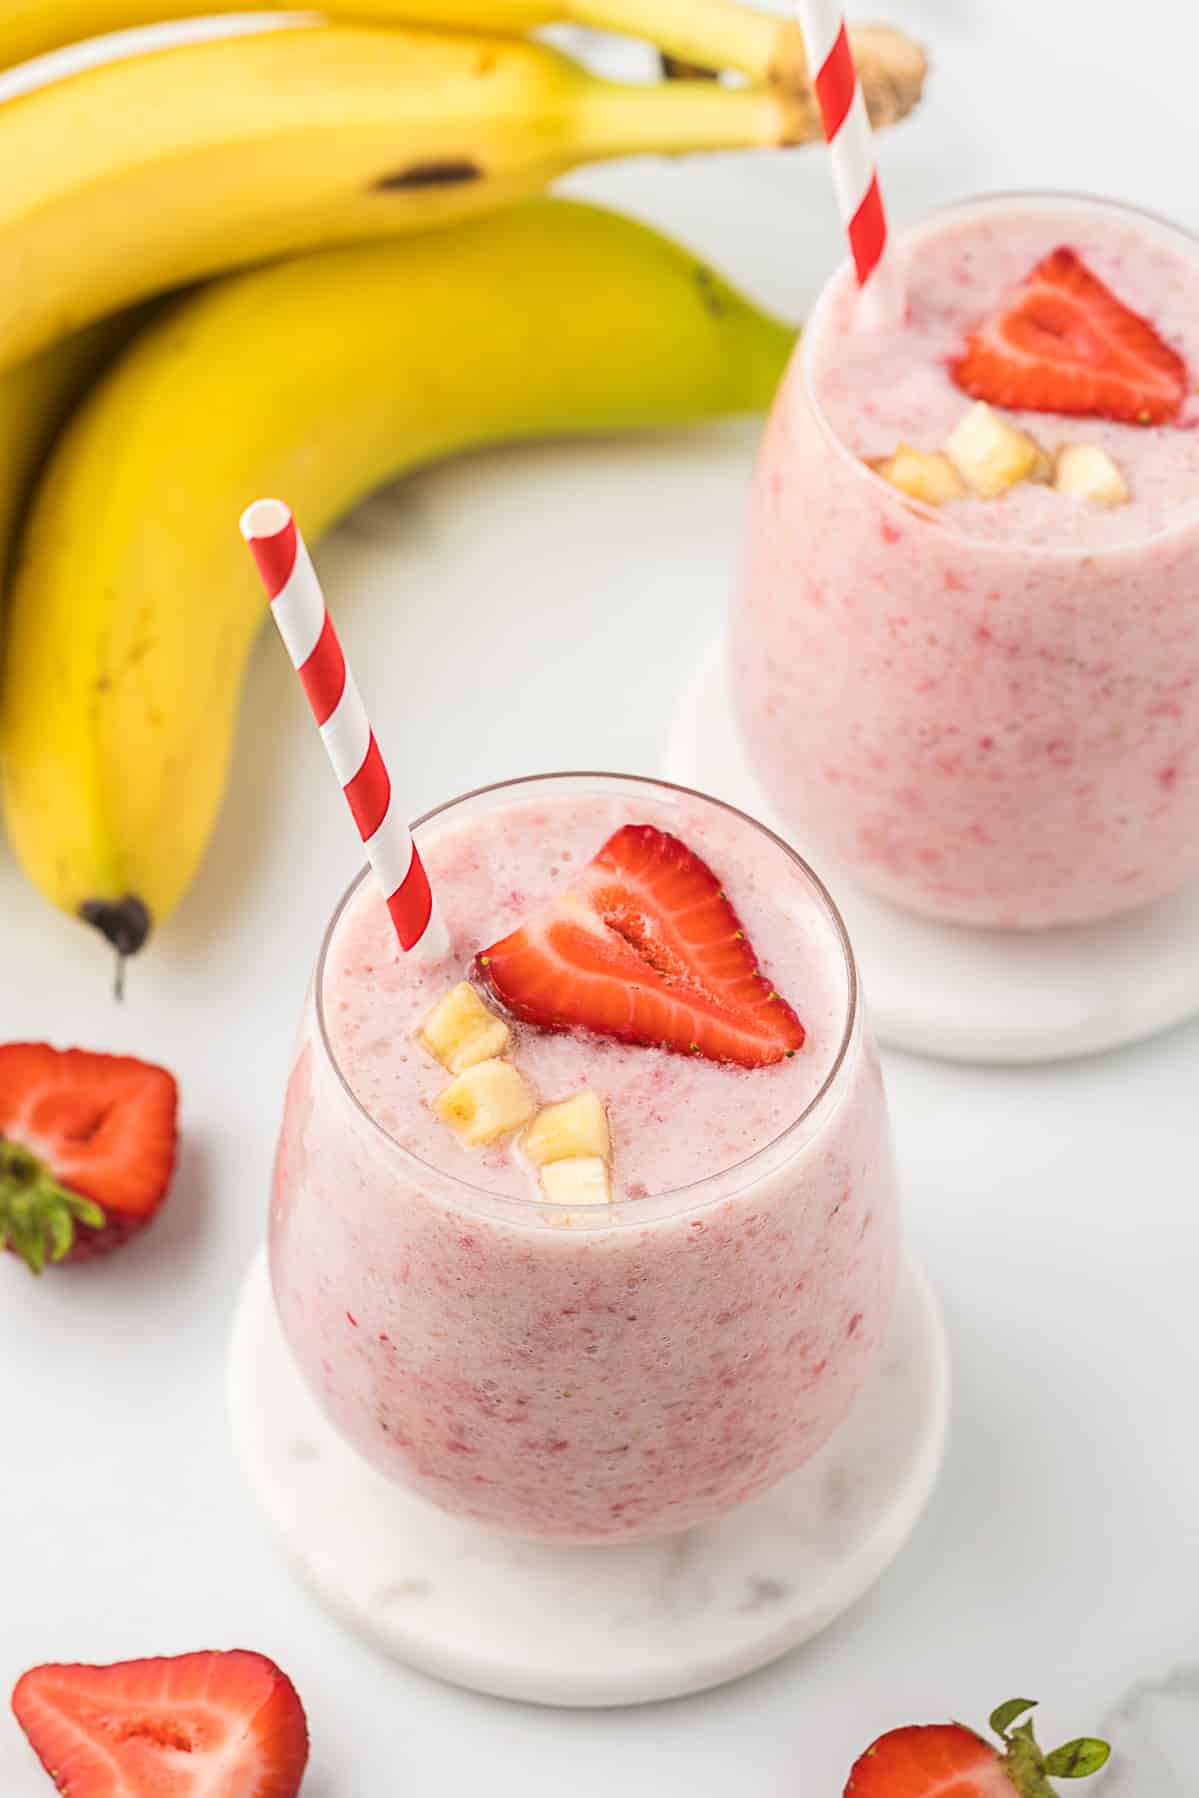 Strawberry Banana Smoothie without yogurt that has bananas and a strawberry as garnish.